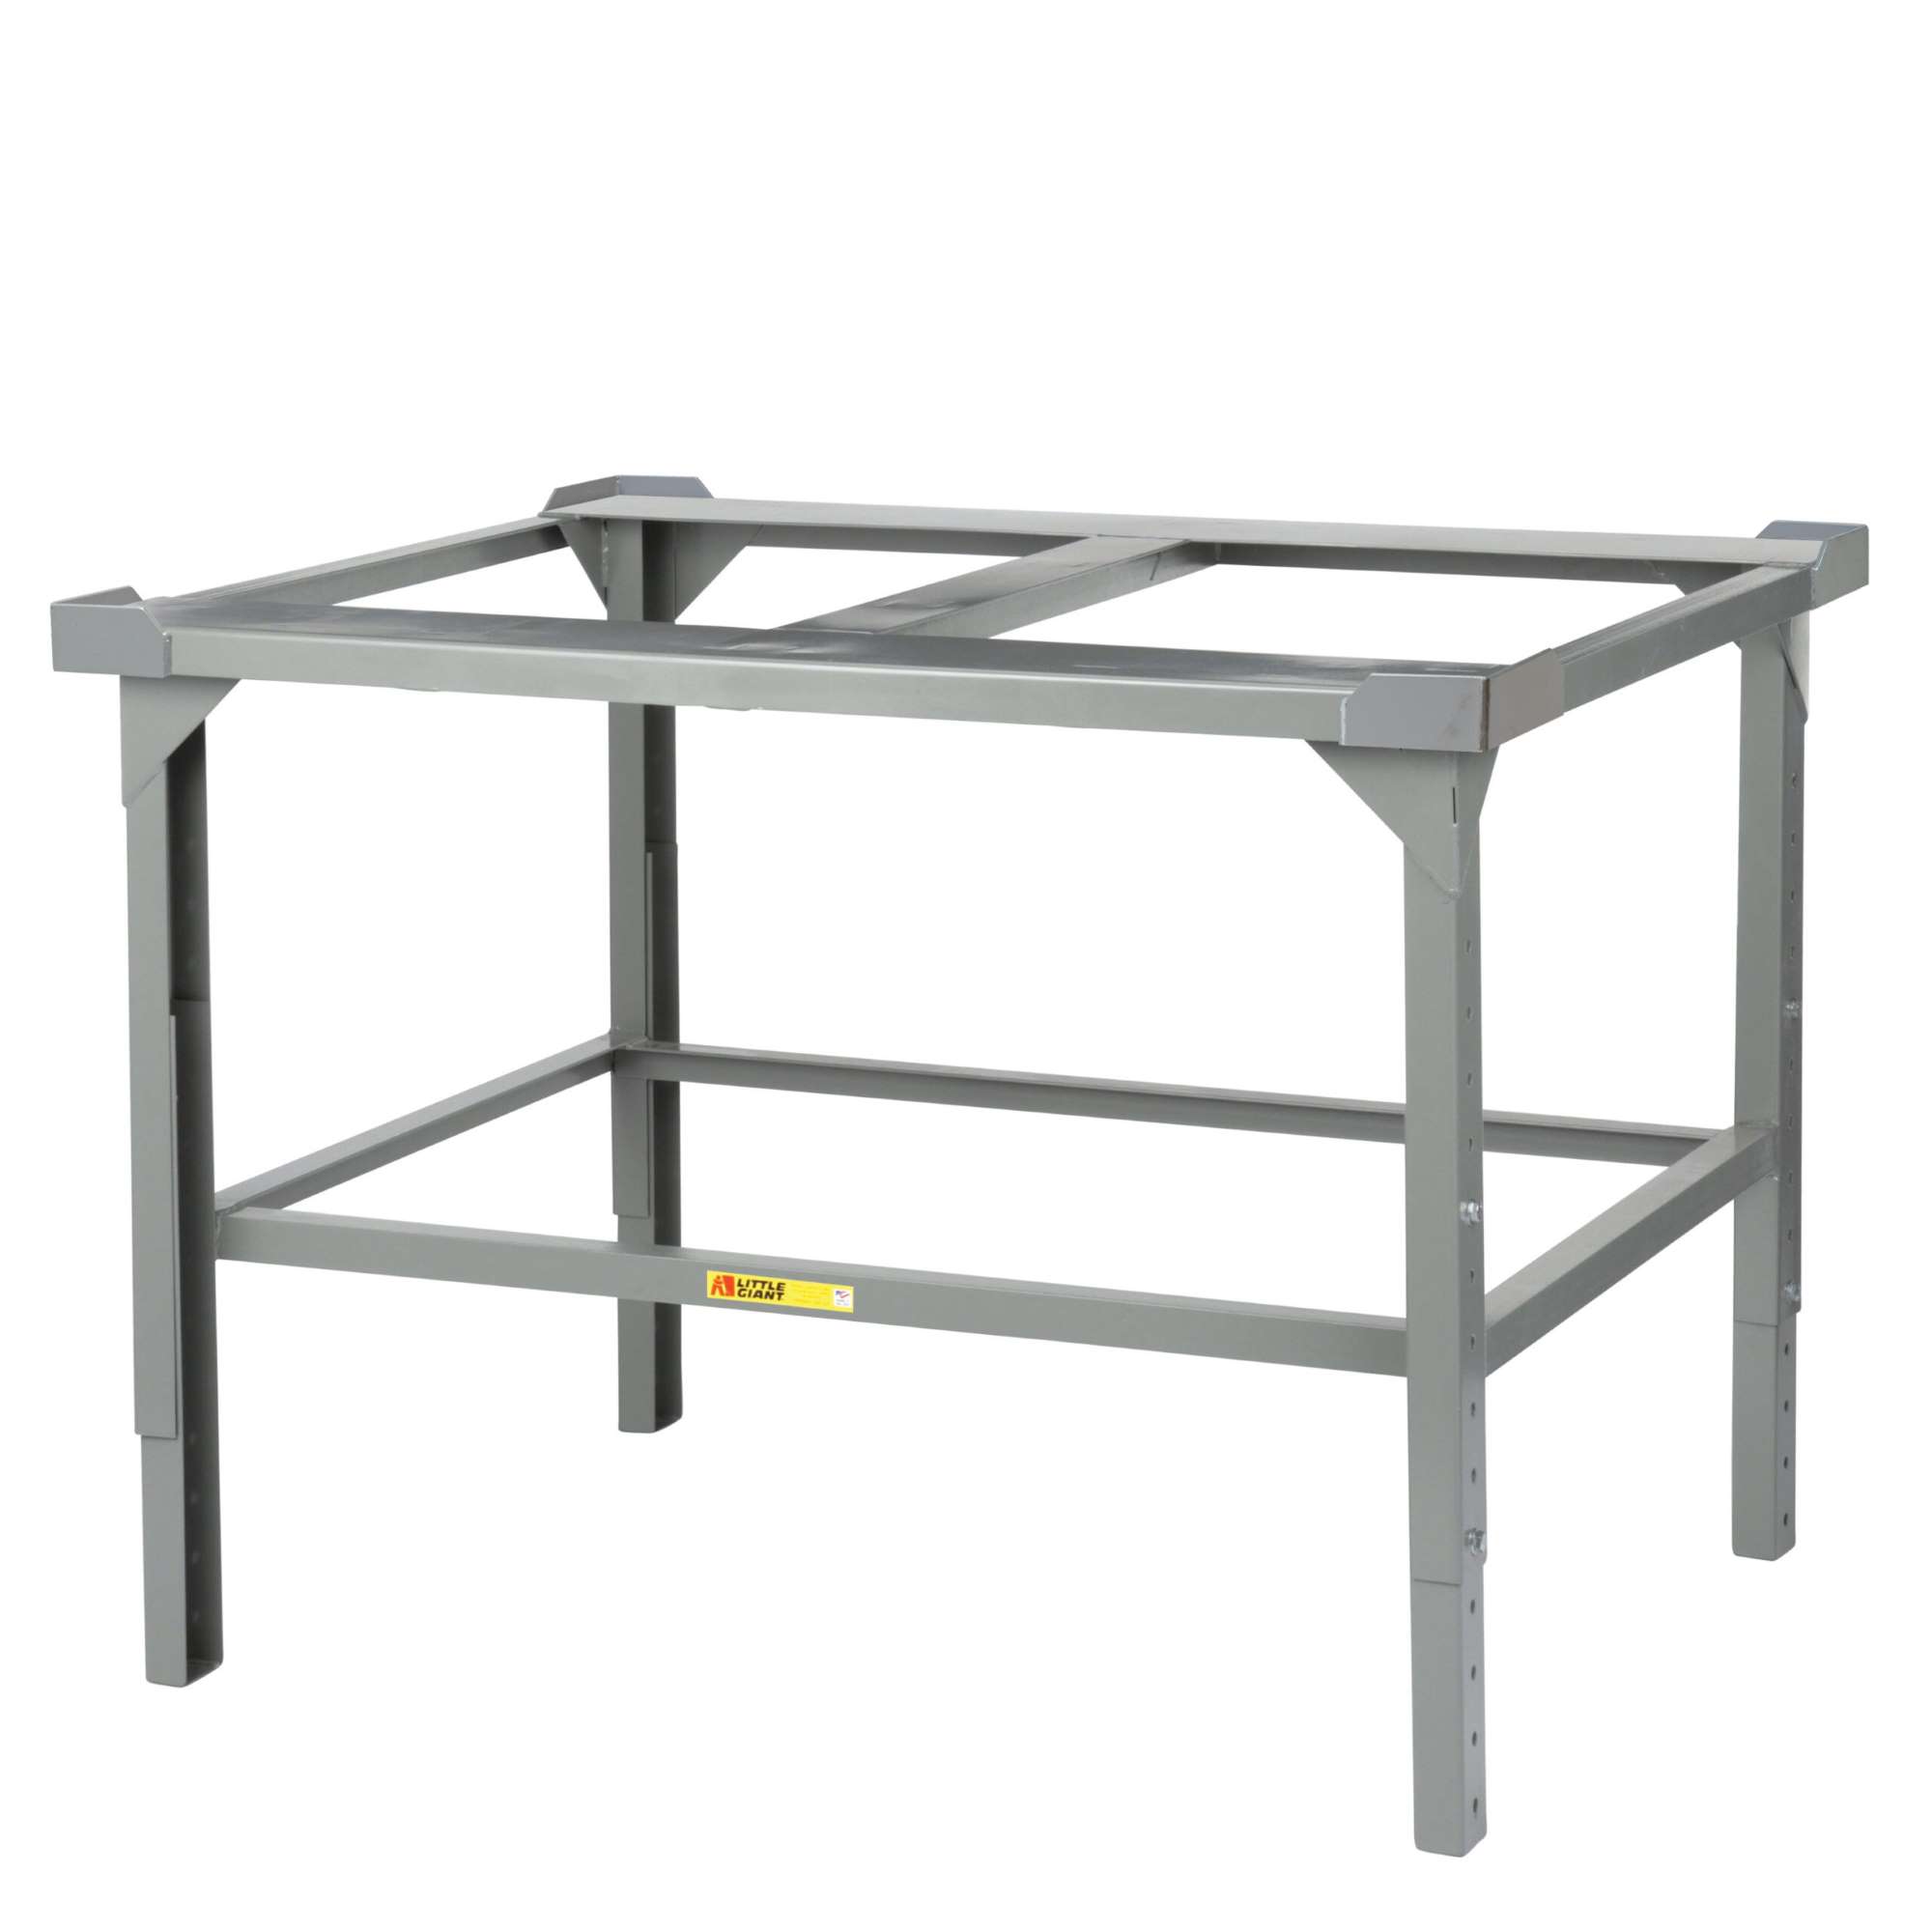 Little Giant stationary pallet stand, 4000 lbs capacity, Fixed 30" height, Adjustable in 2" increments